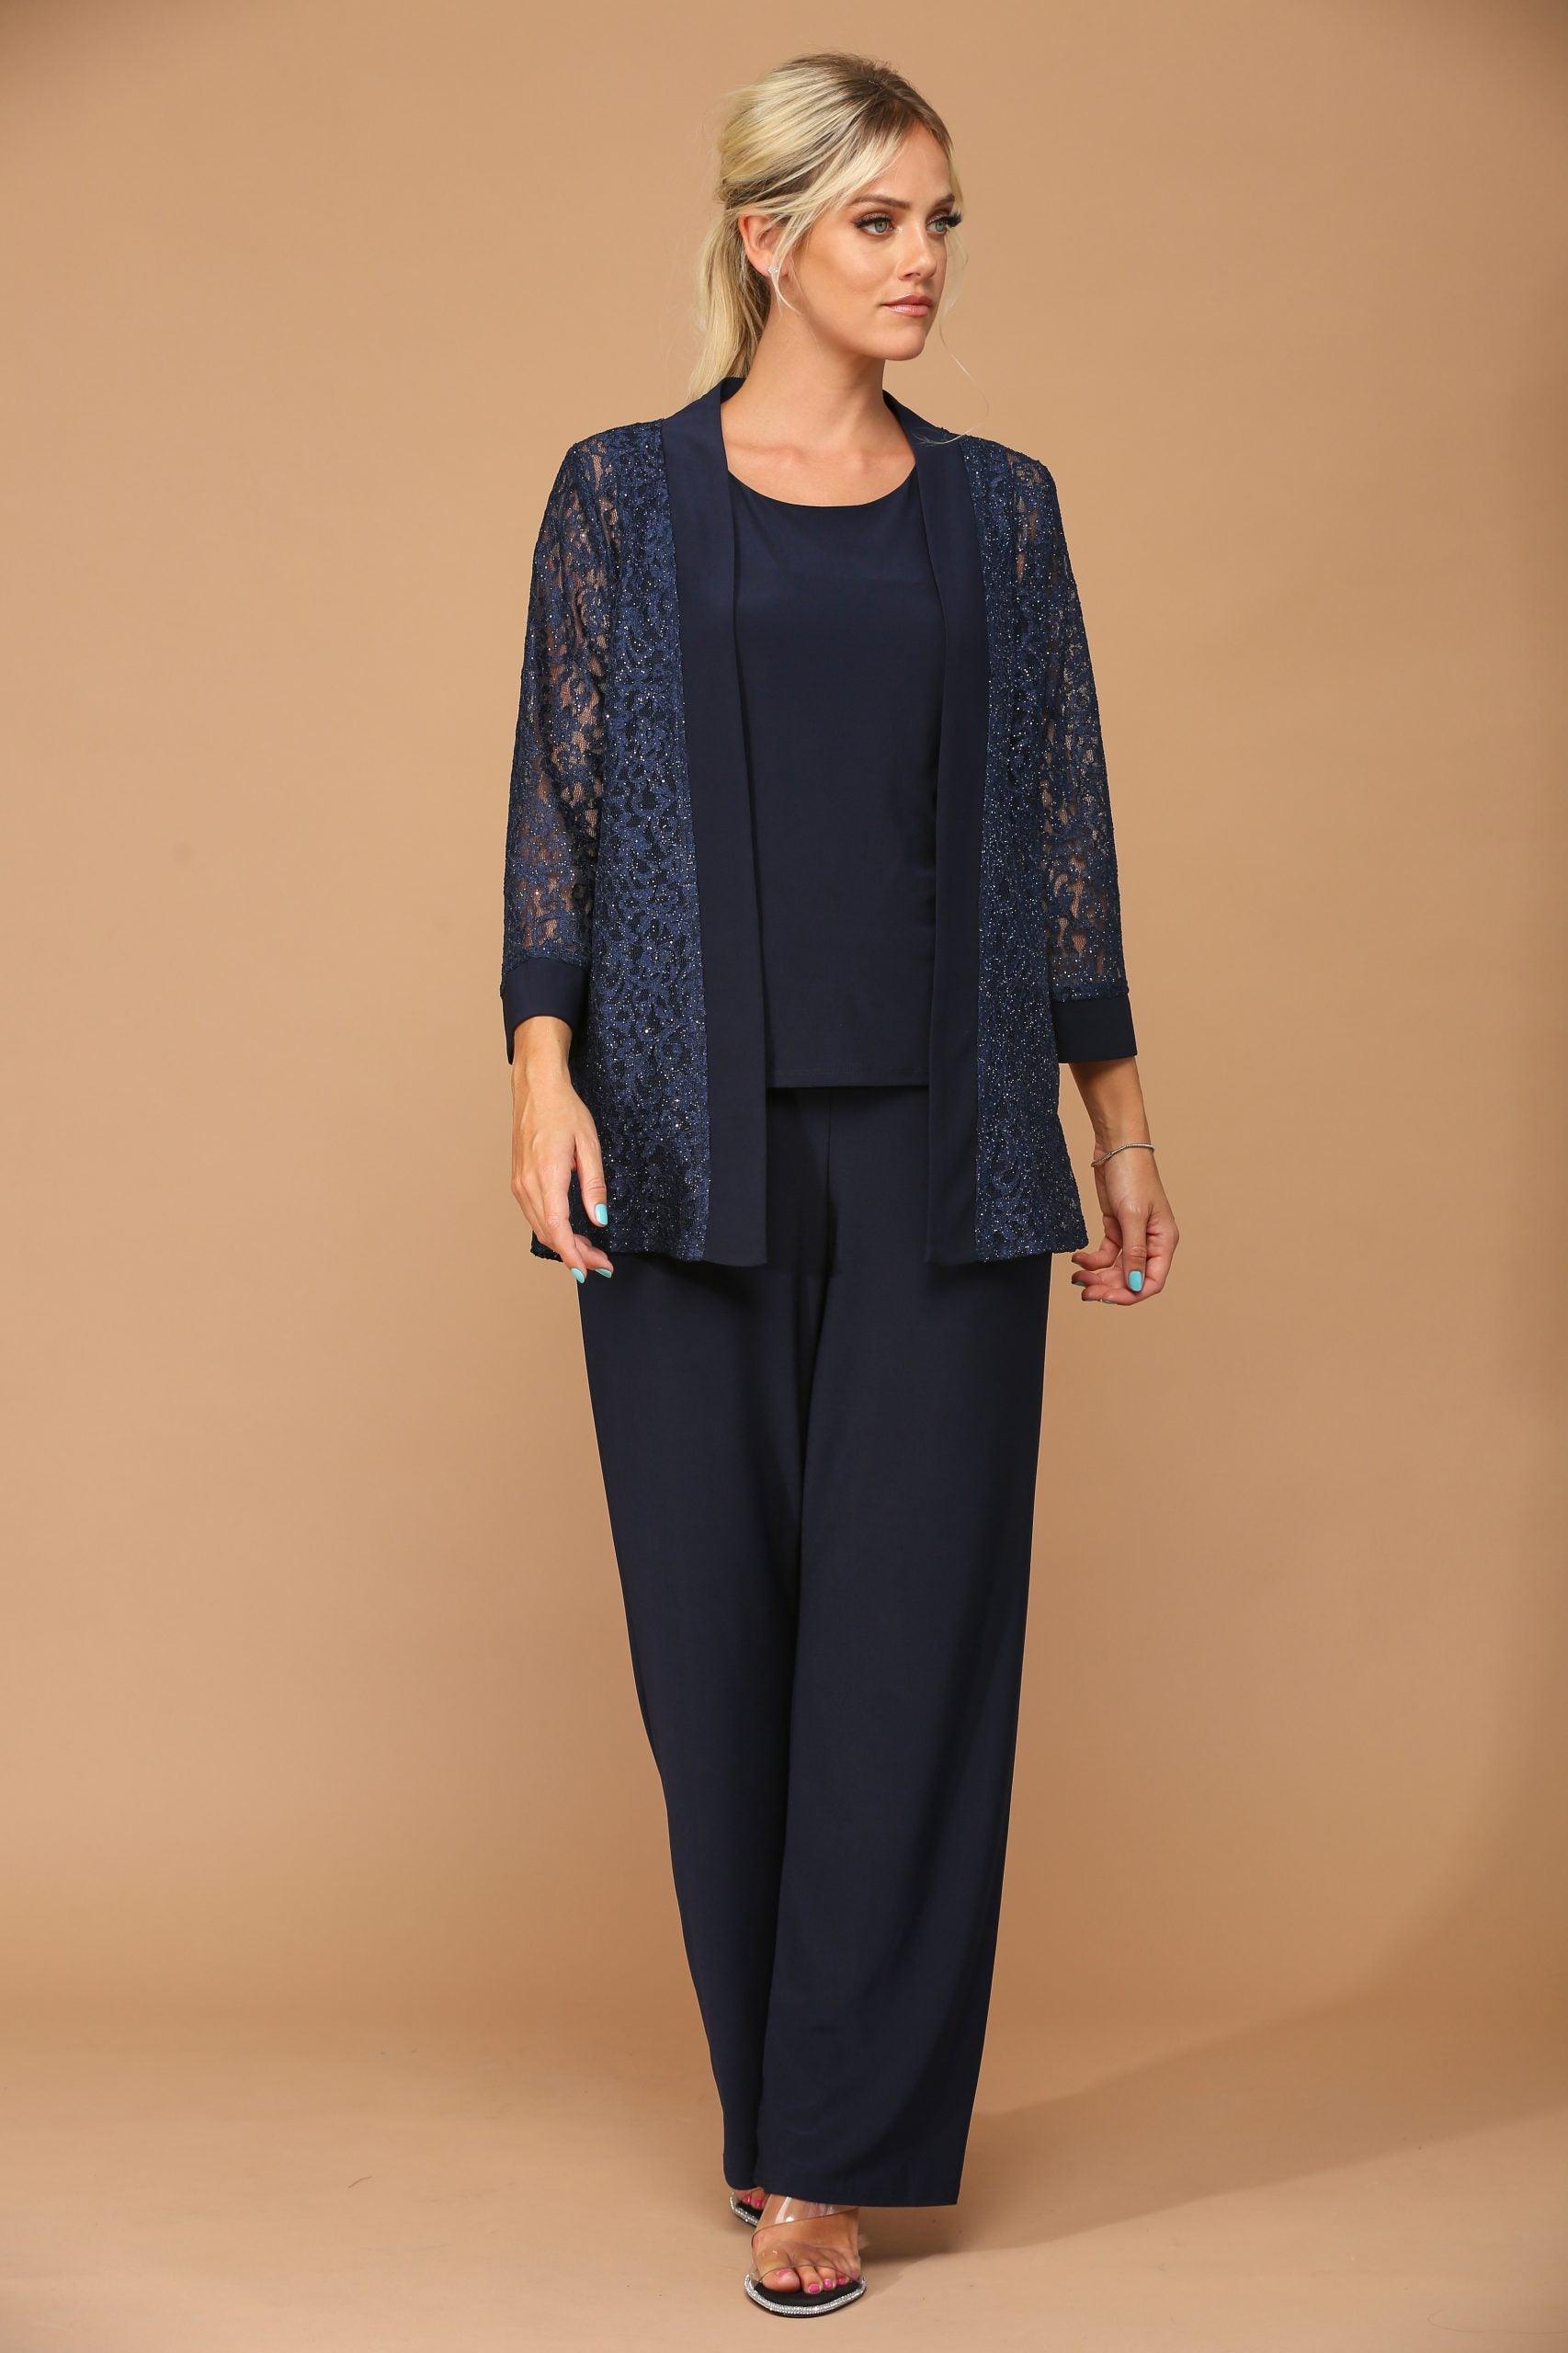 Plus Size Navy Blue Mother Of The Bride Pant Suit With Long Sleeve Custom  Jackets For Evening Party From Verycute, $42.22